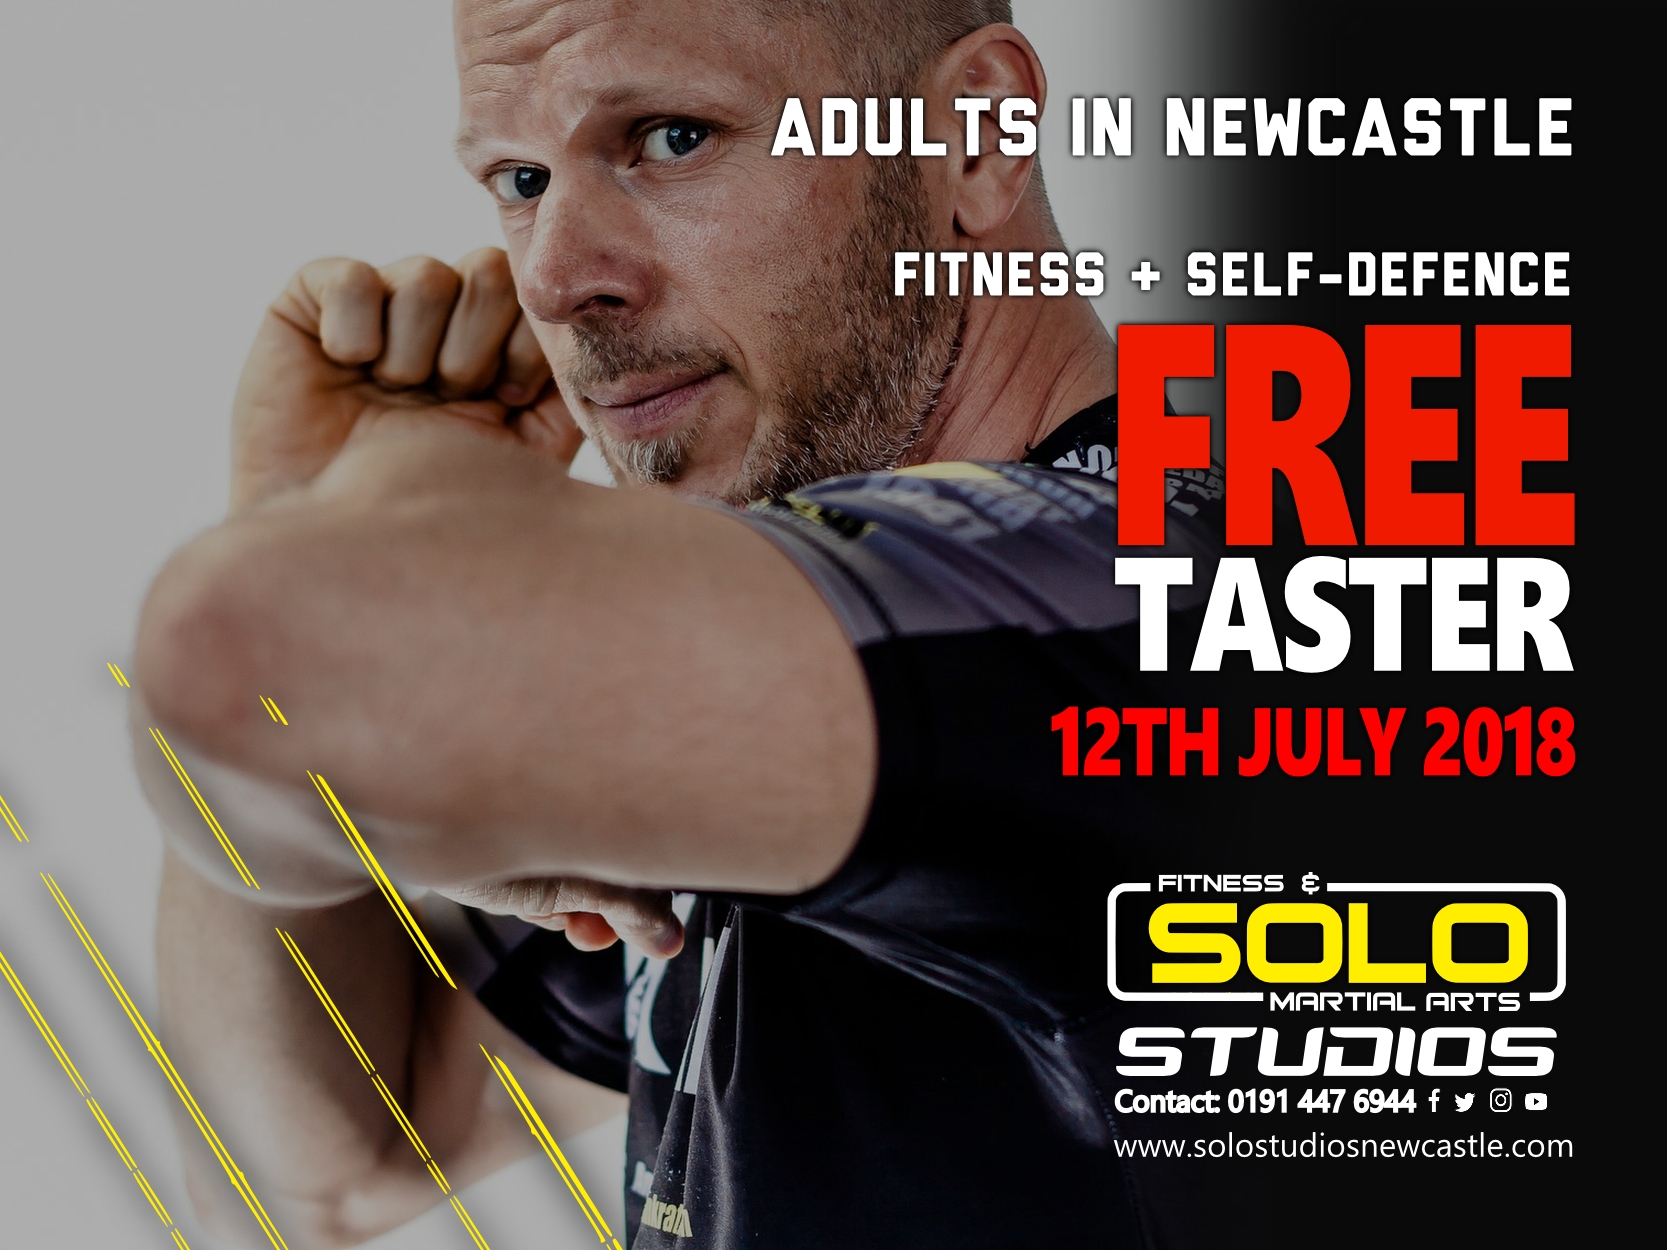 You are currently viewing Exciting New Adult FREE taster in Gosforth